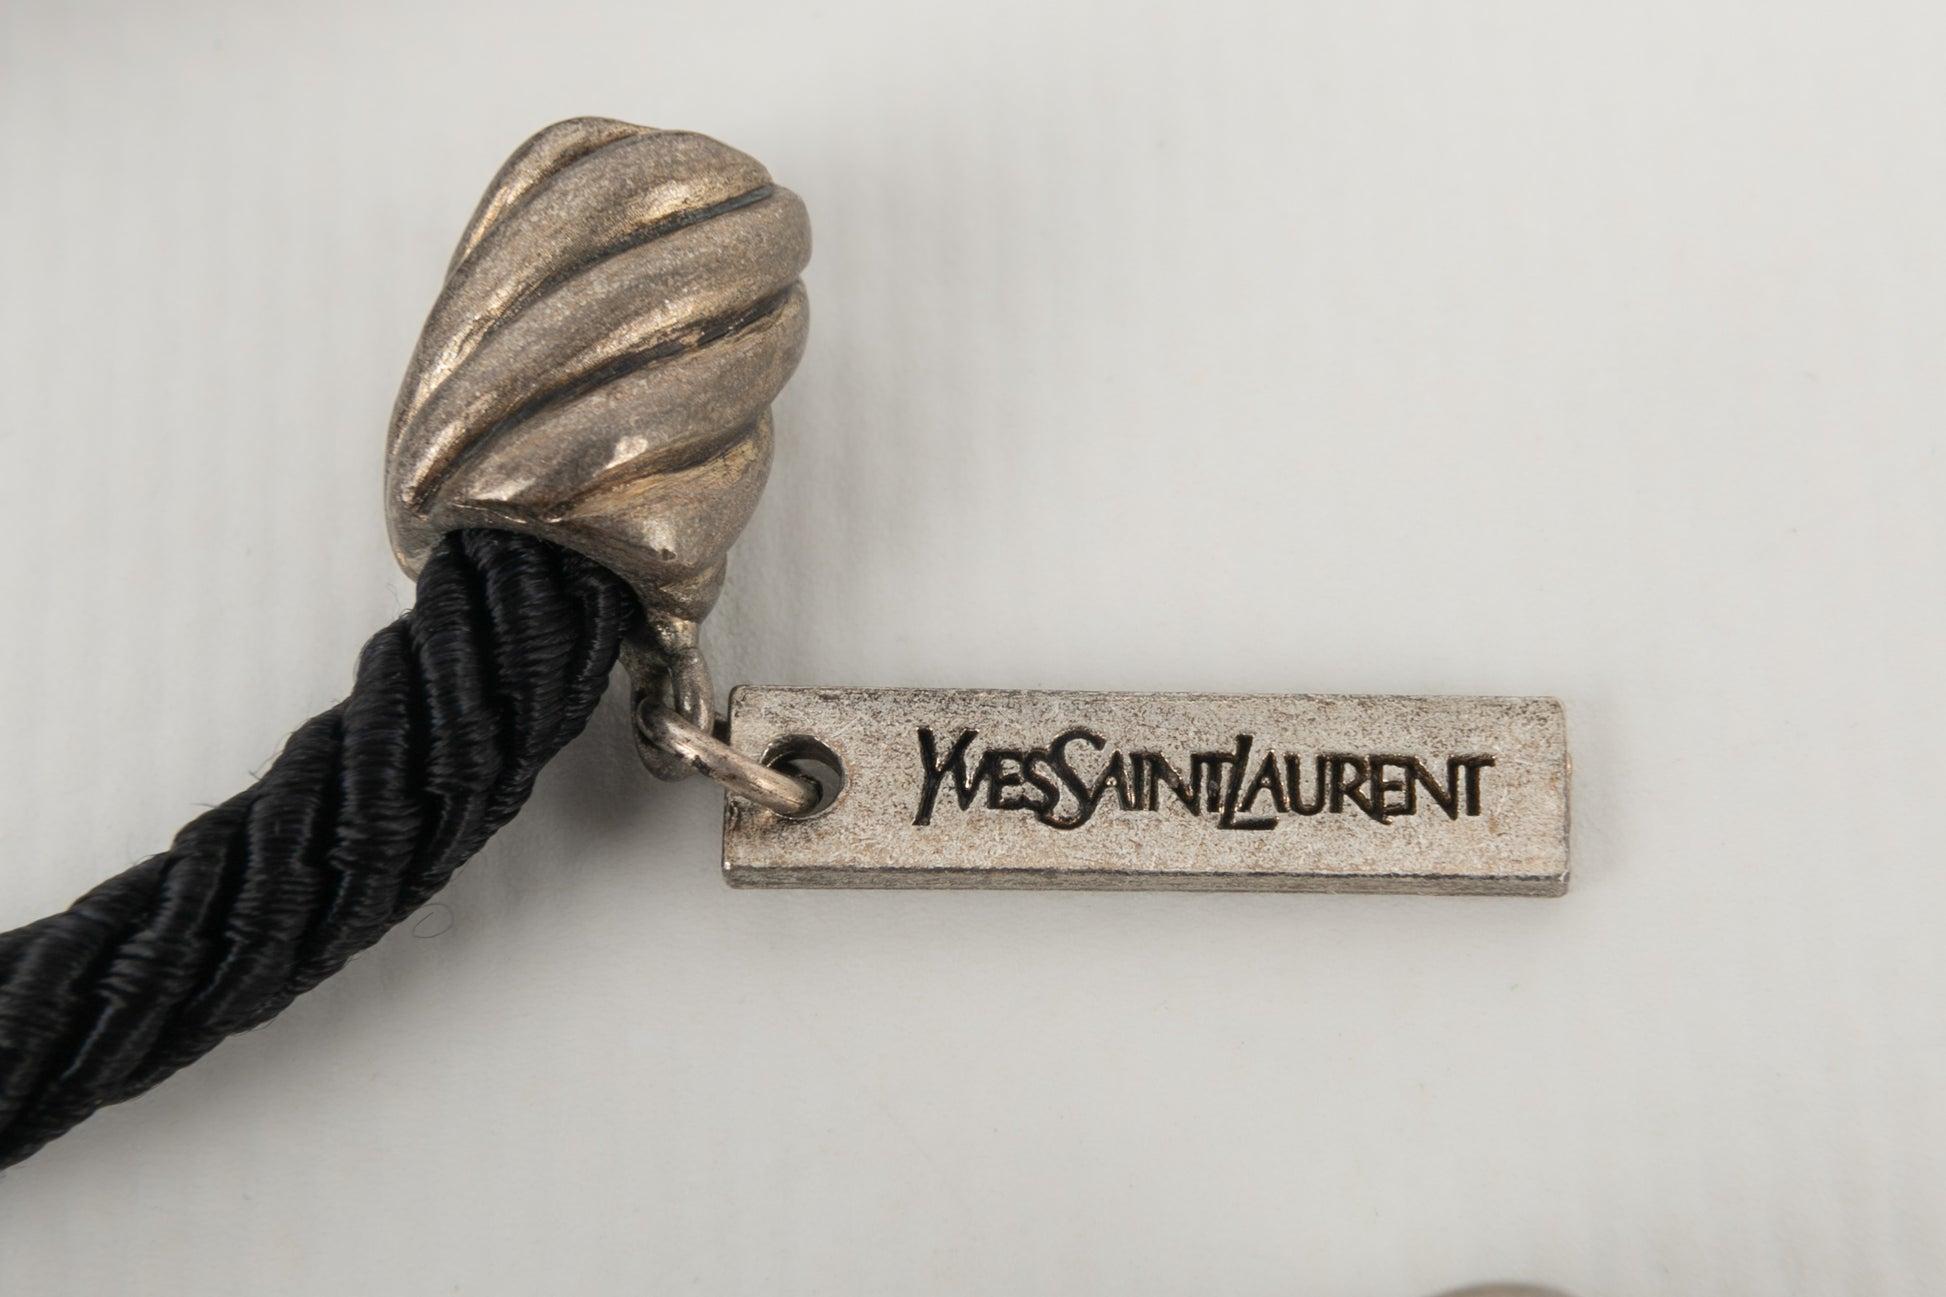 Yves Saint Laurent Necklace with a Black Trimmings For Sale 2